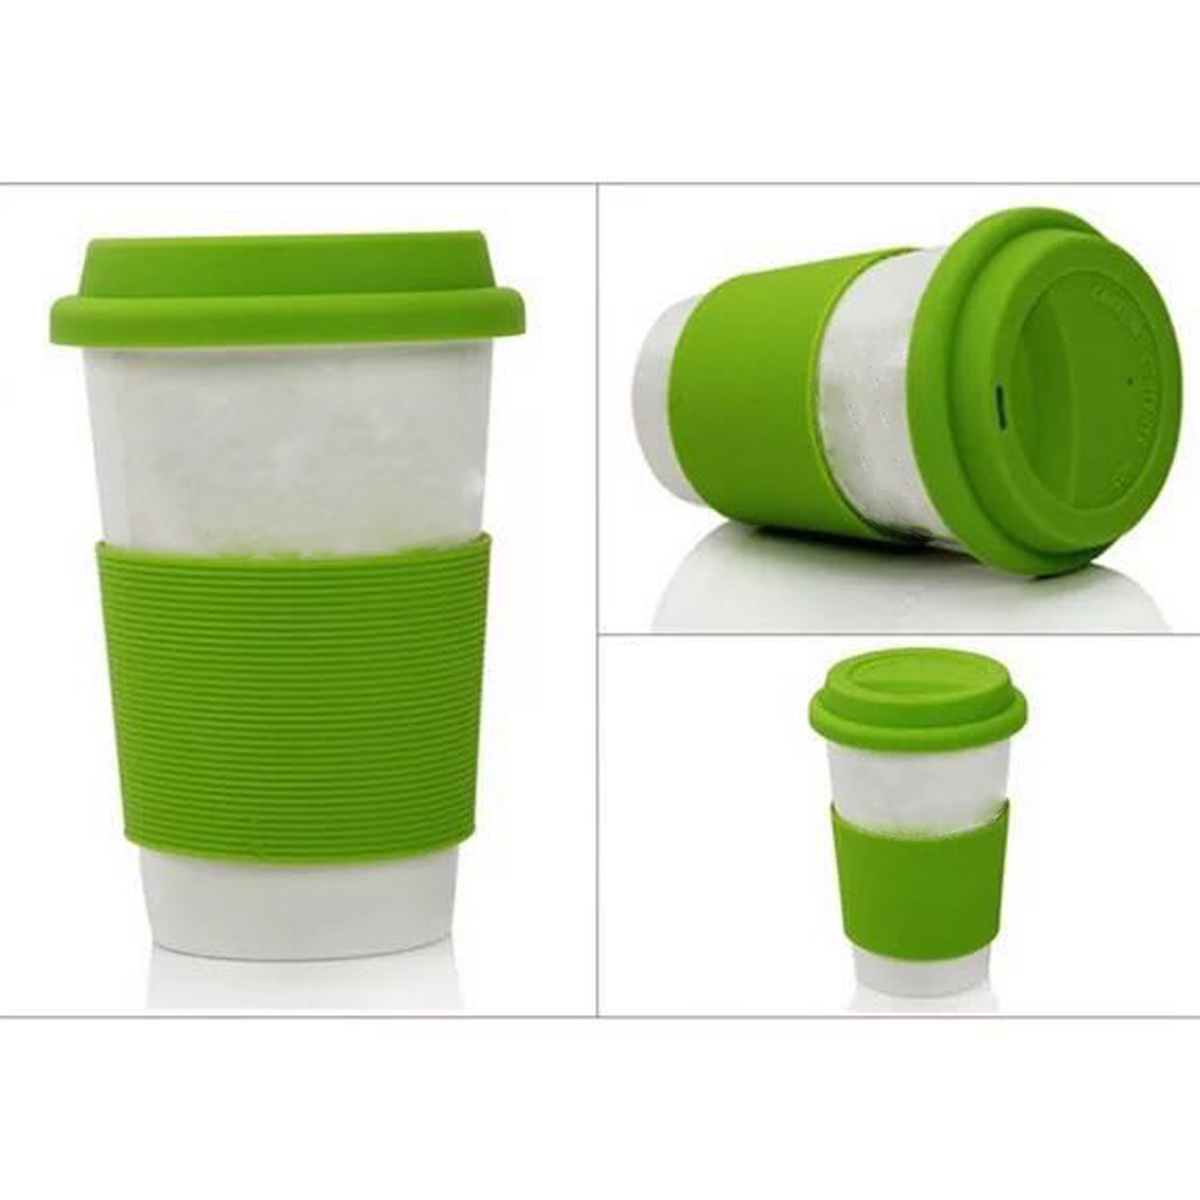 GL-AKL0052 Double Ceramic Coffee Mug with Silicone Lid and Sleeve